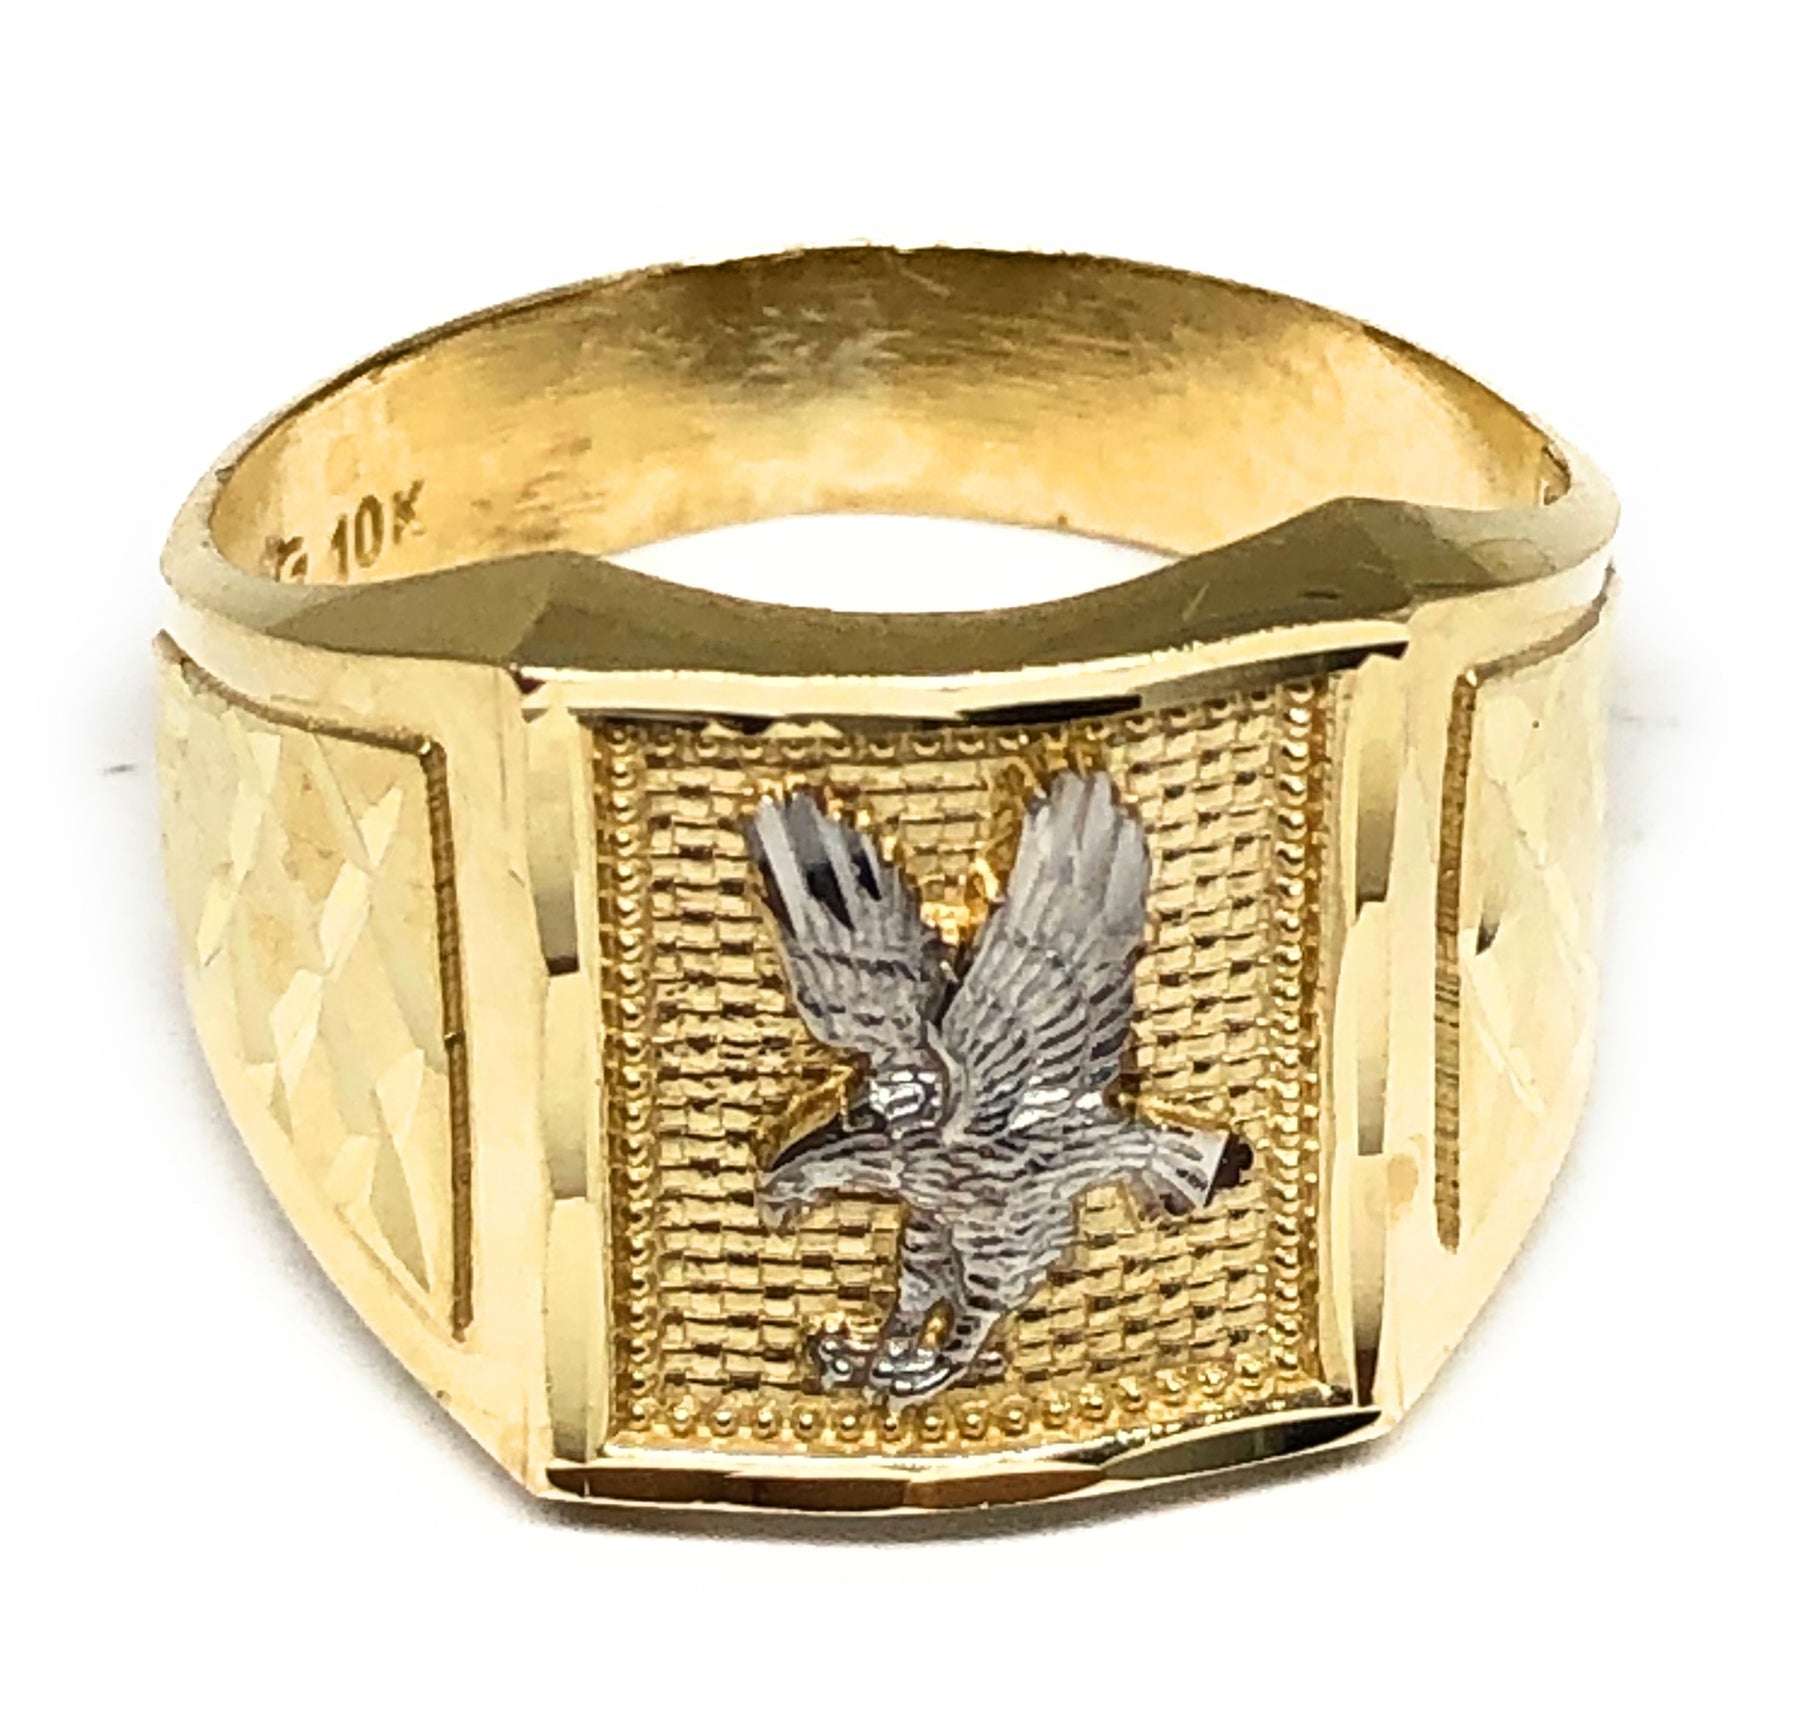 Inspired By Our Surrounding: The Gold Eagle Ring | by Jahda Jewelry | Medium